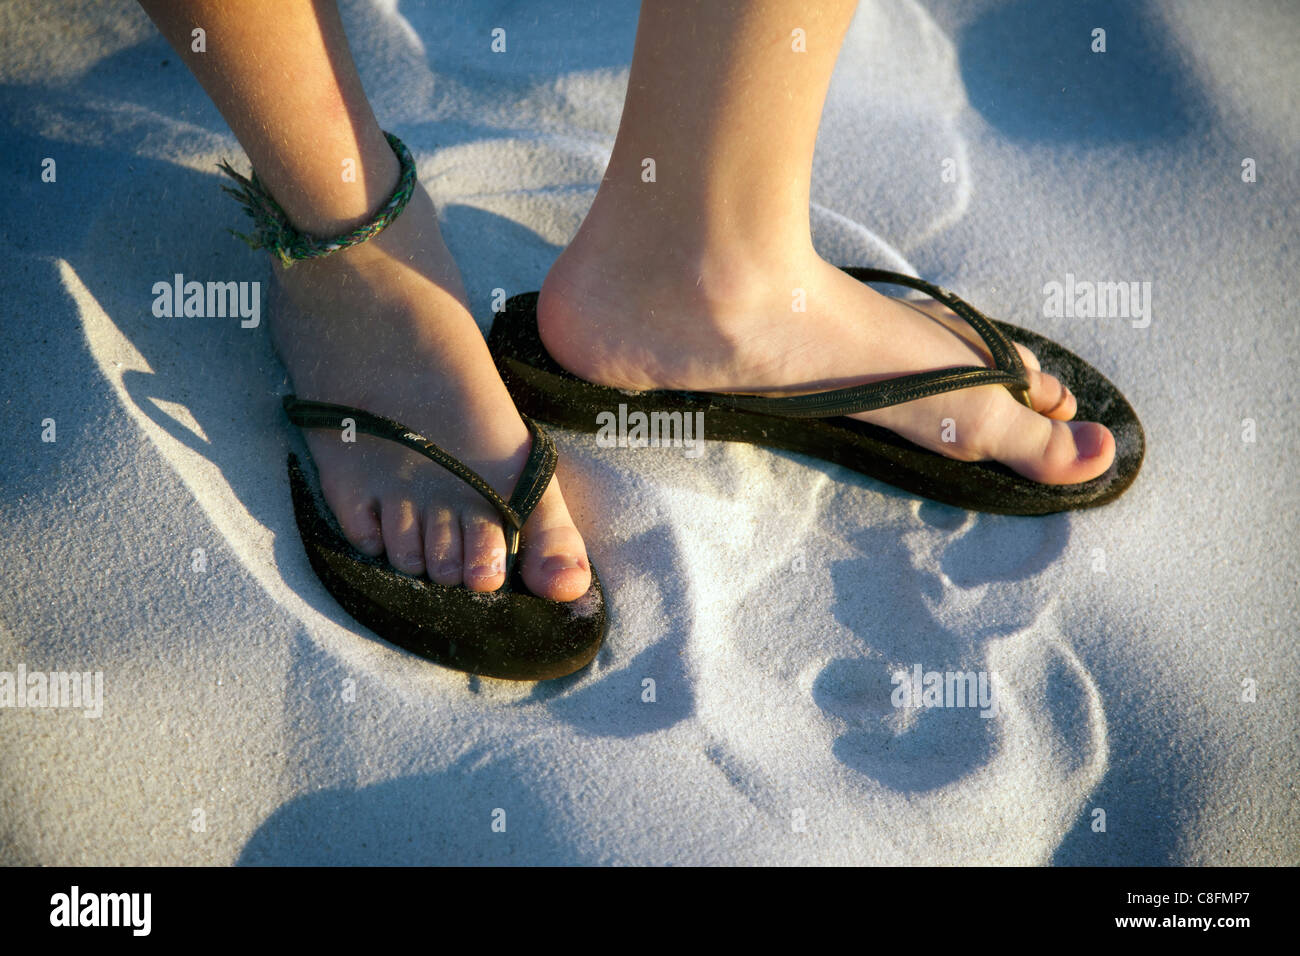 Child wearing sandals on the beach Stock Photo